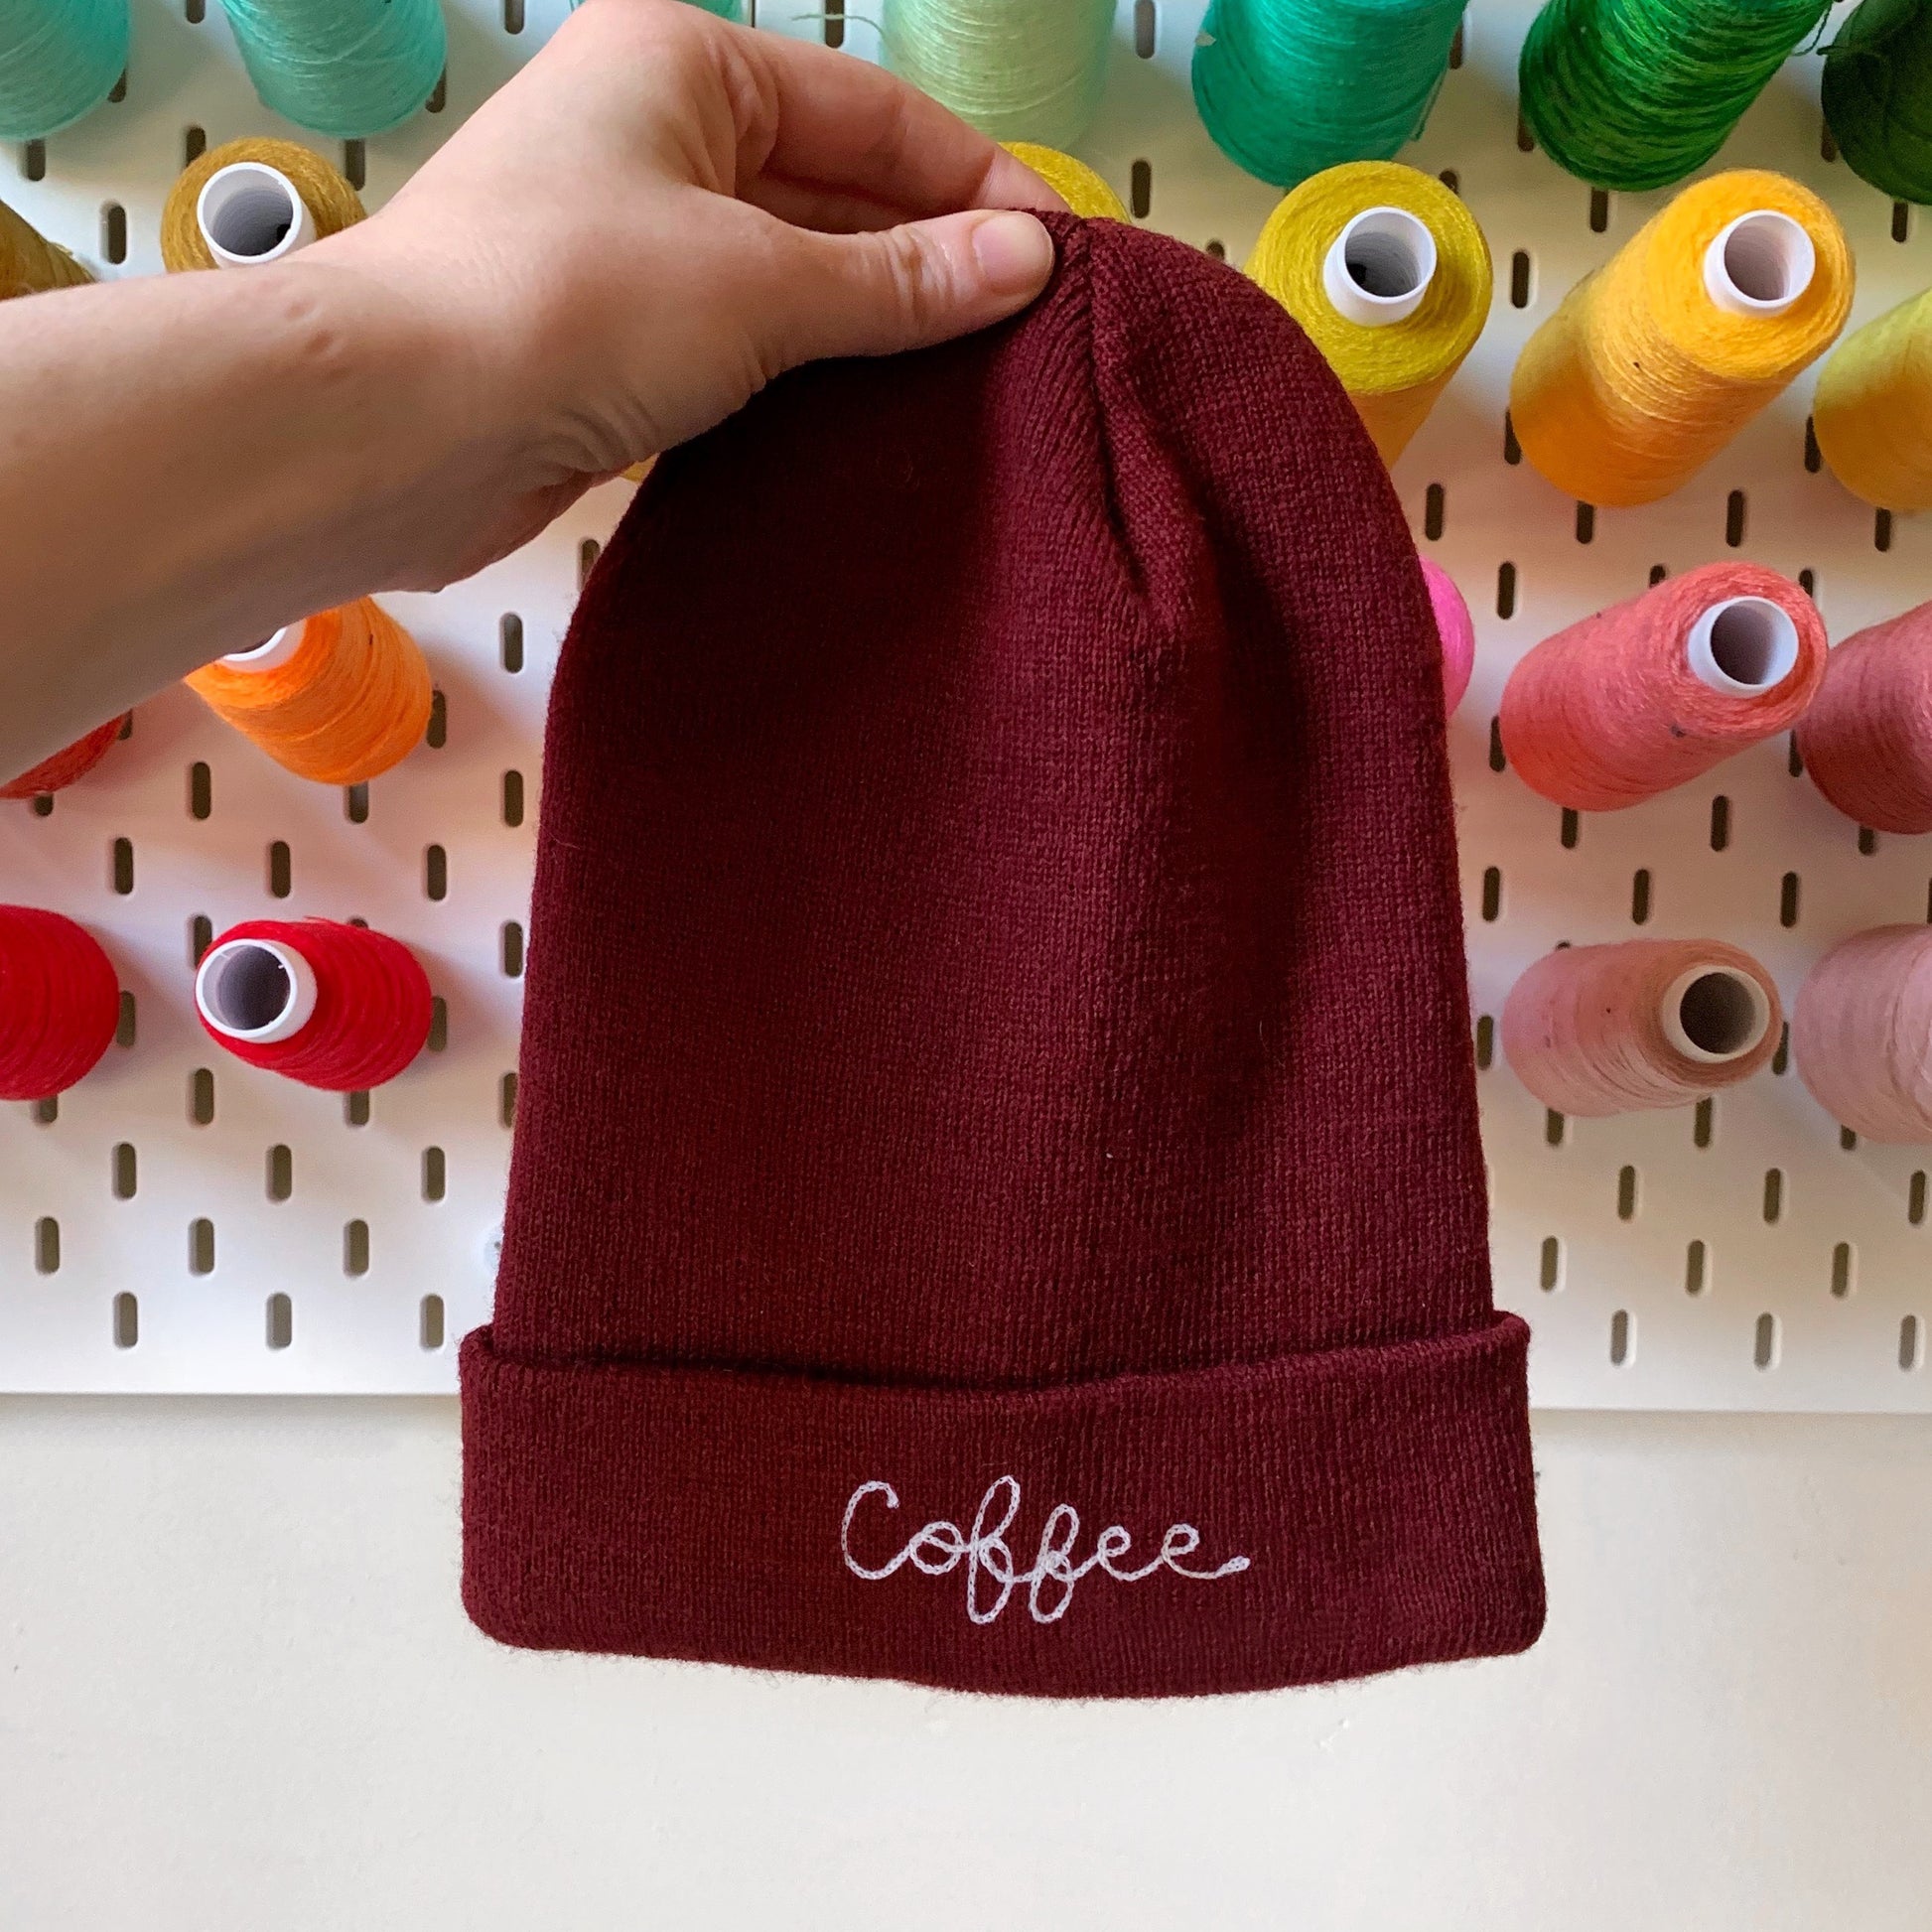 Custom Beanies: Design Your Own Embroidered Beanies